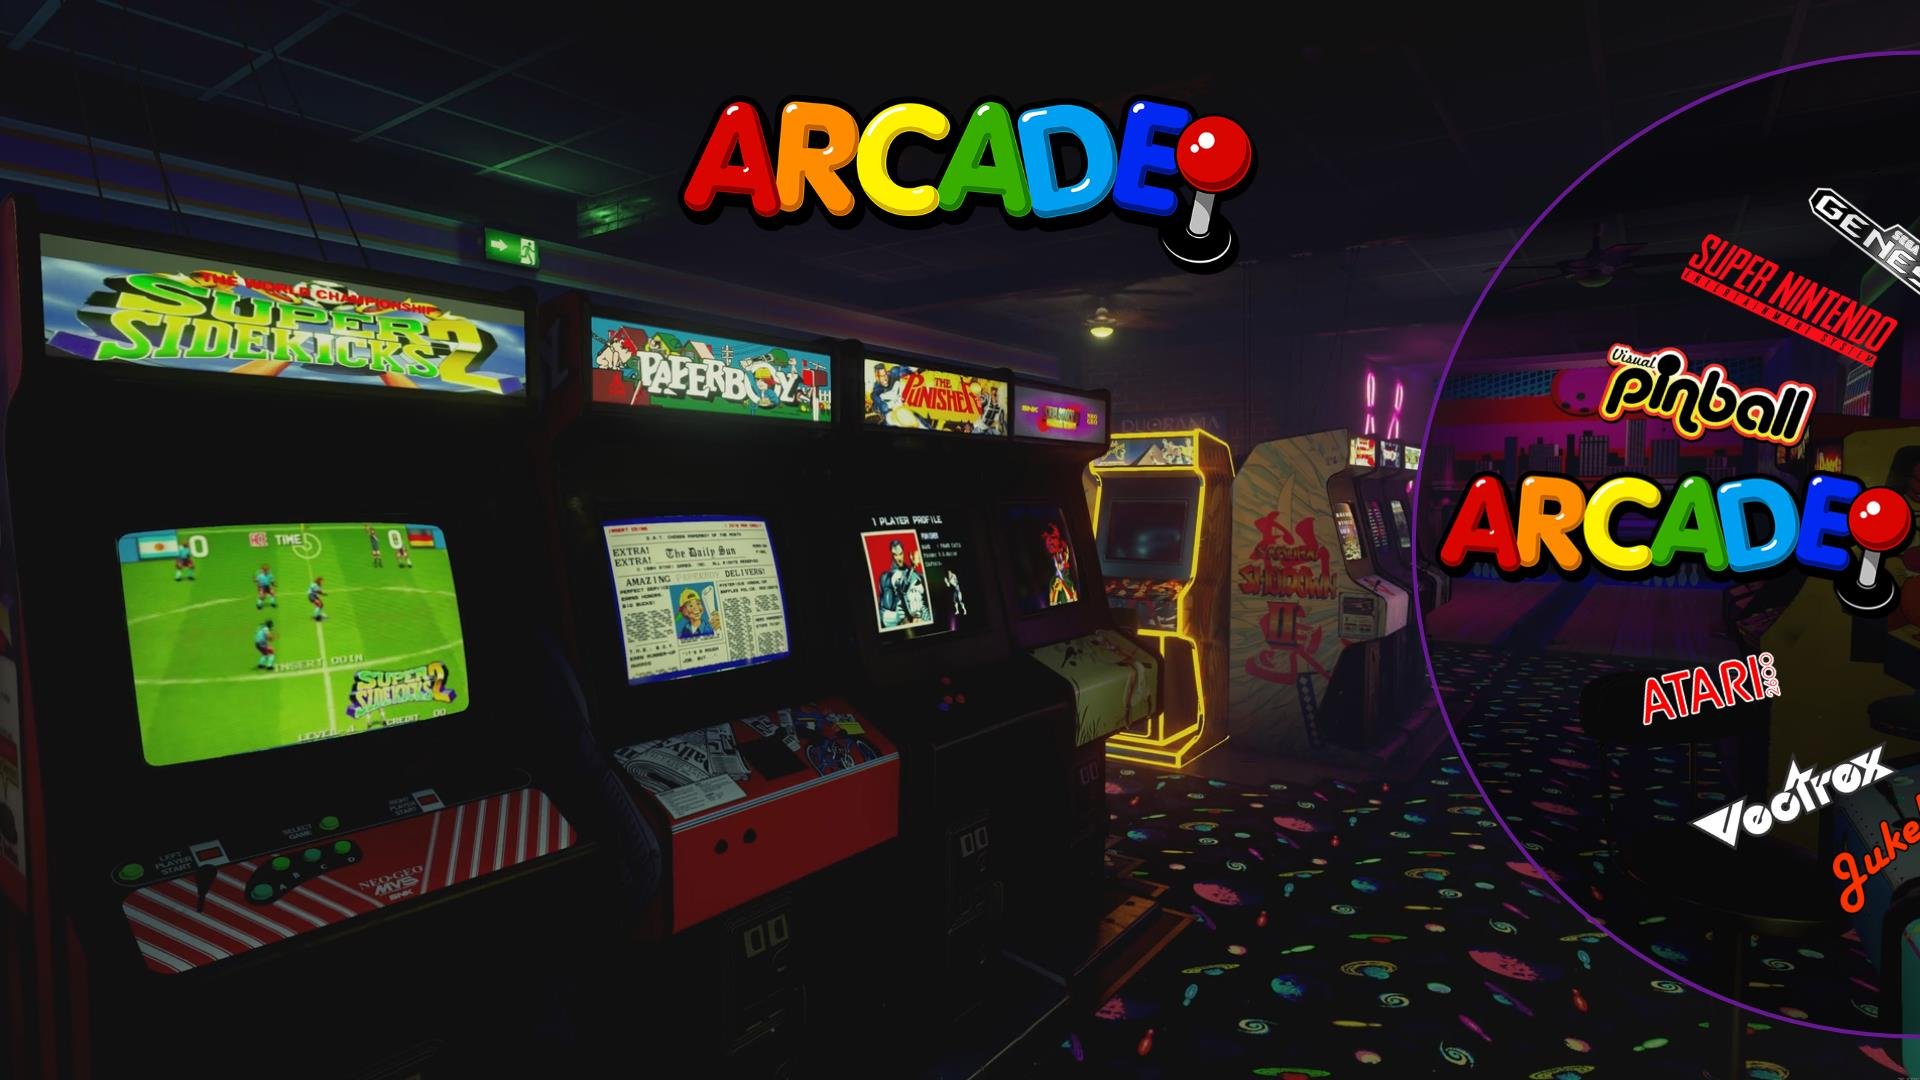 More information about "Mr C's Arcade"